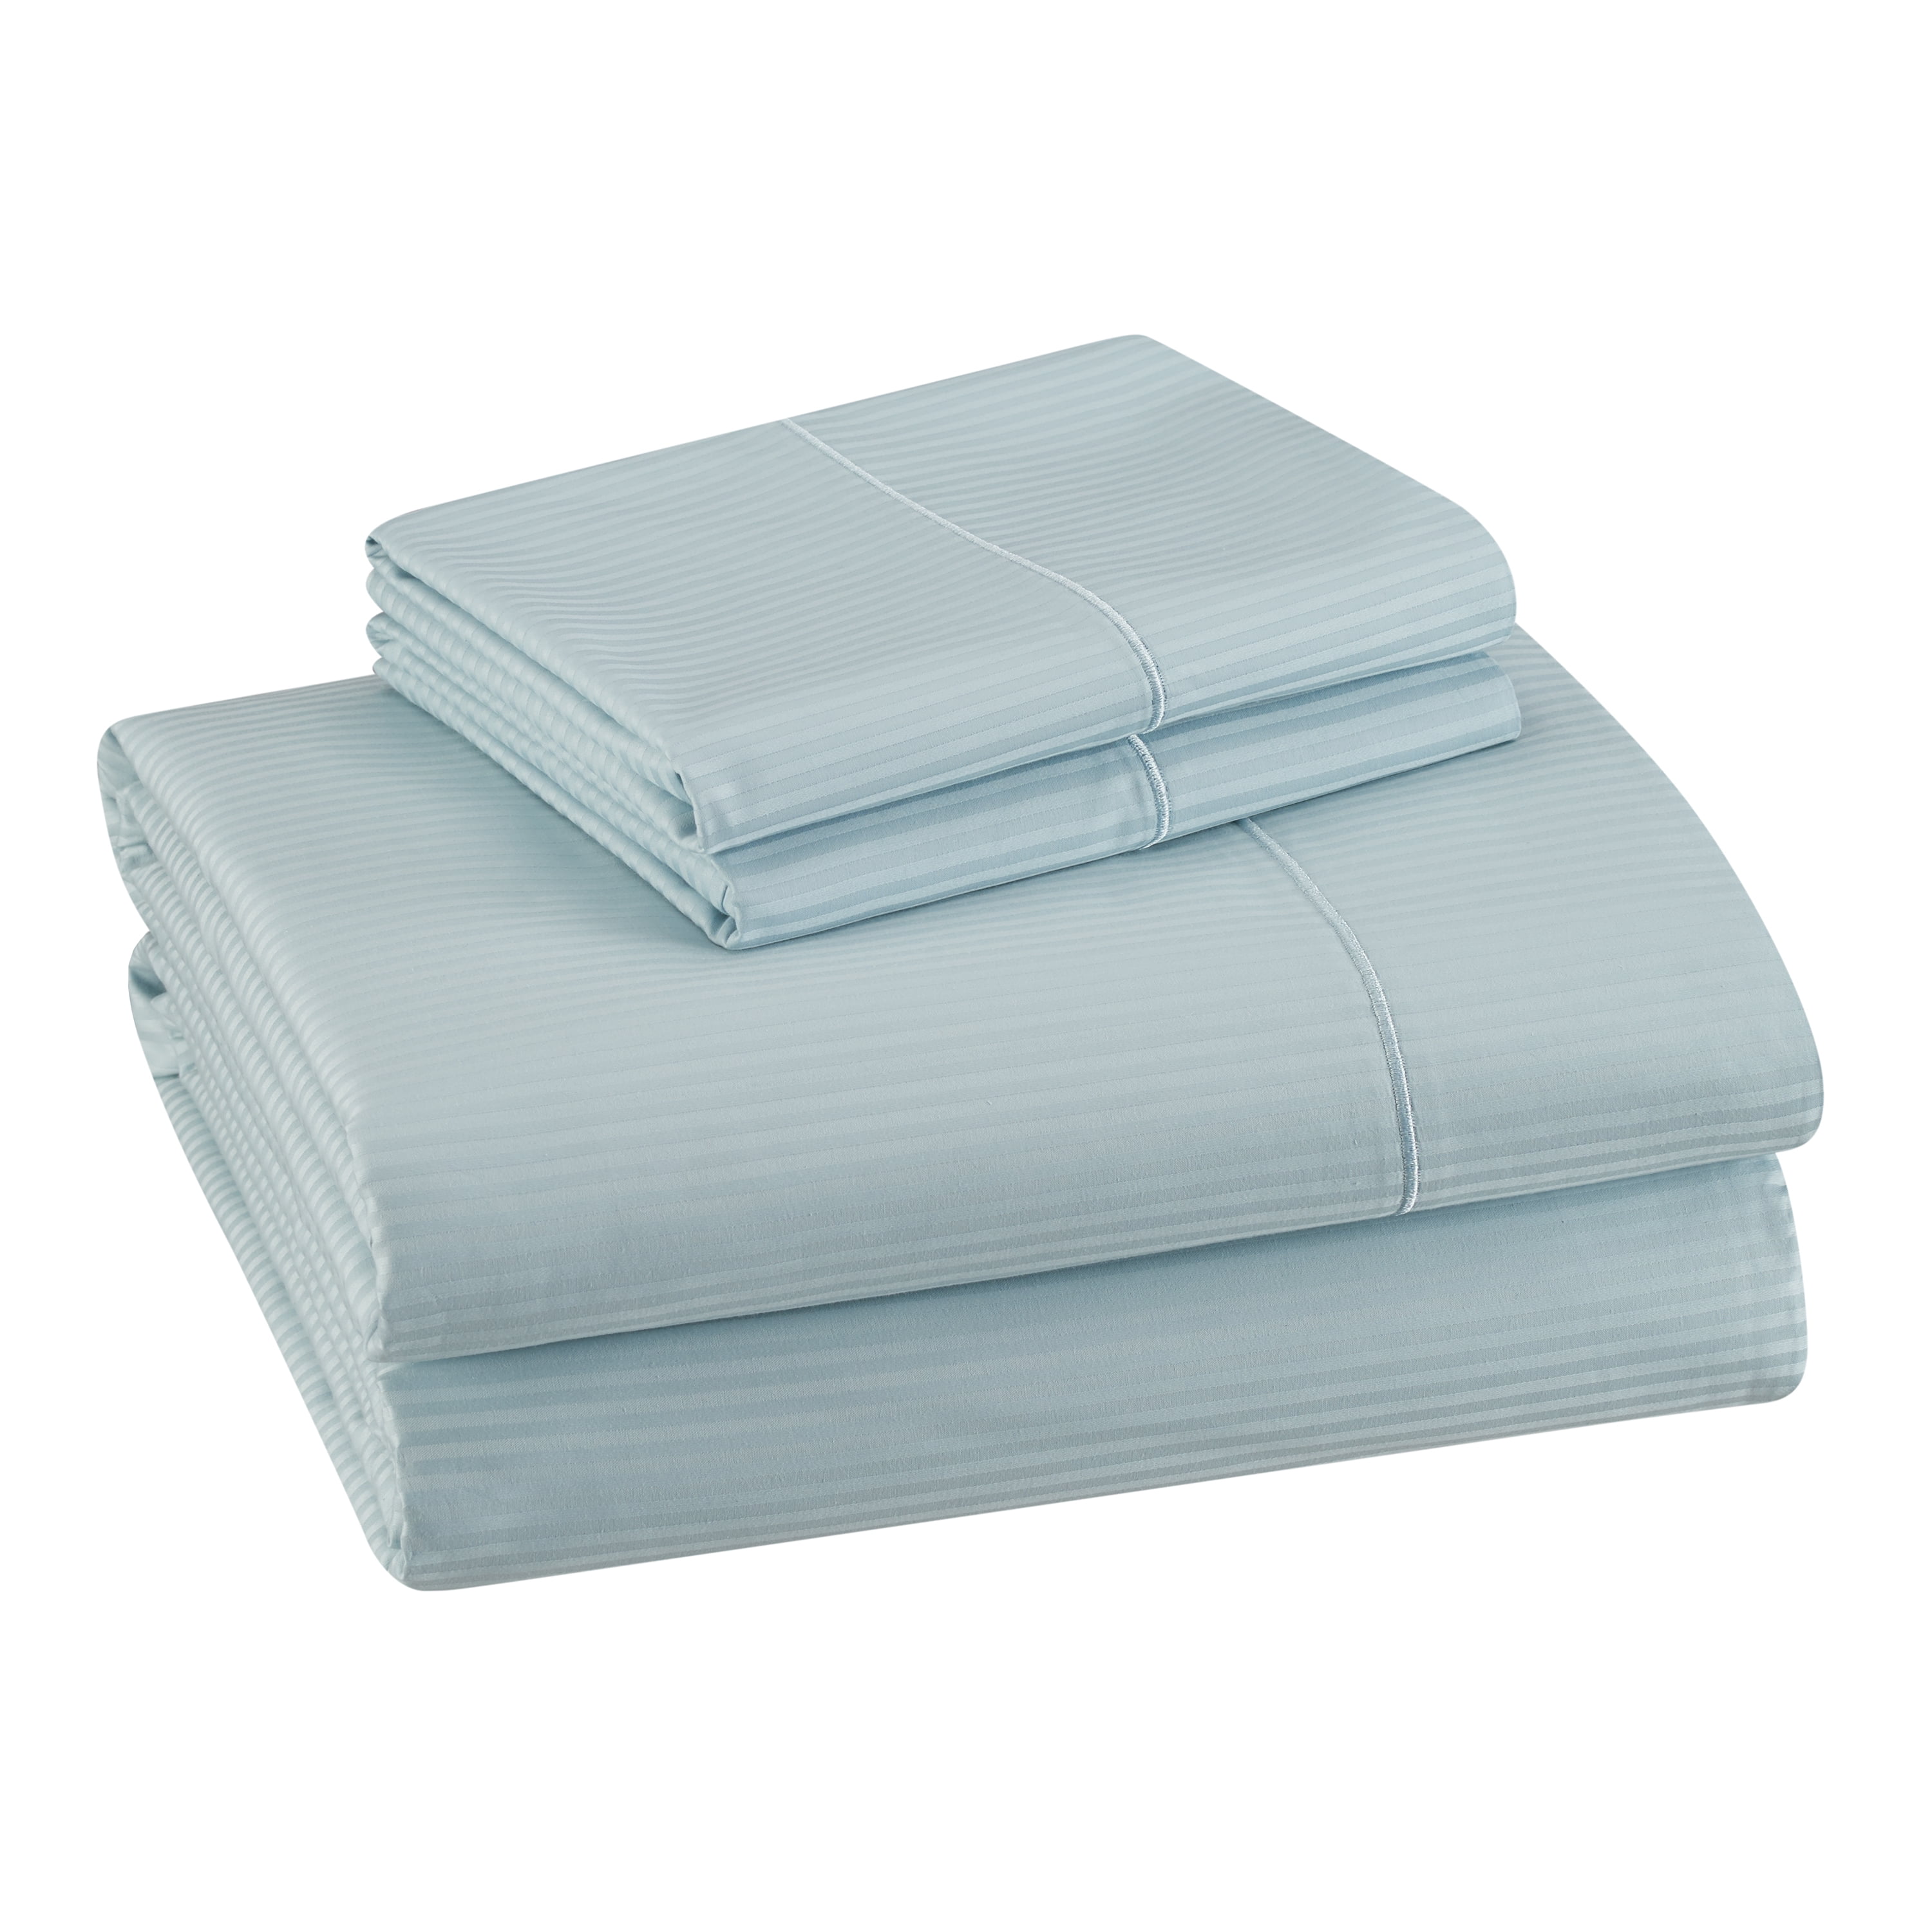 Hotel Style Full 600 Thread Count Teal Cloud Damask Sheet Set 100 Cotton for sale online 